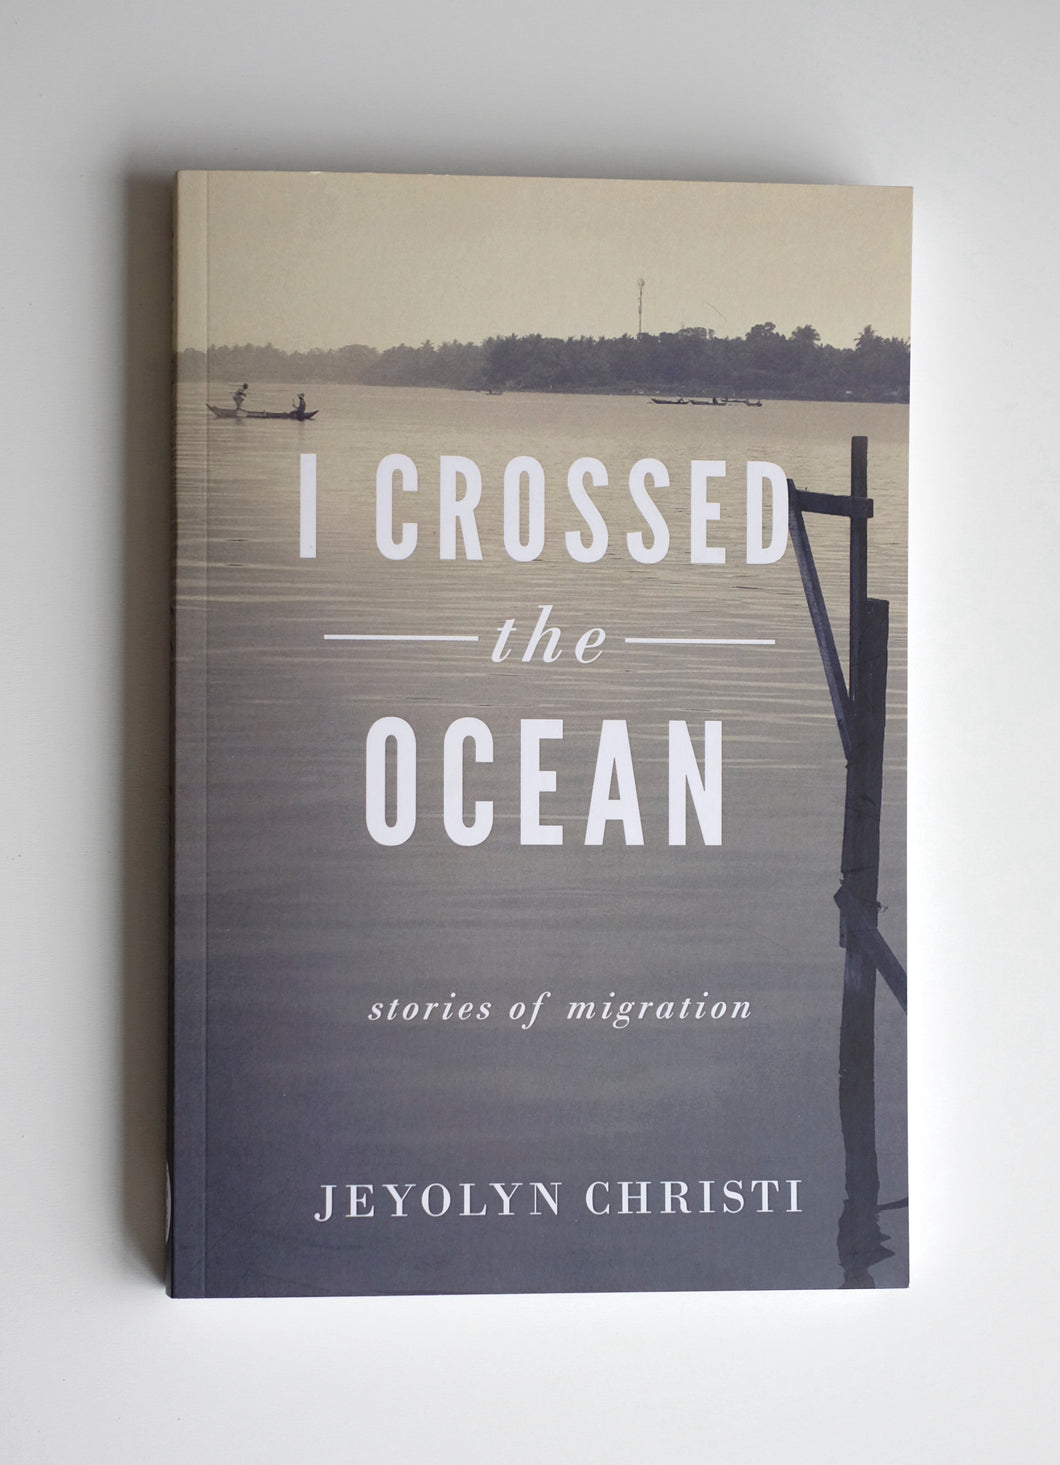 I Crossed the Ocean: Stories of Migration